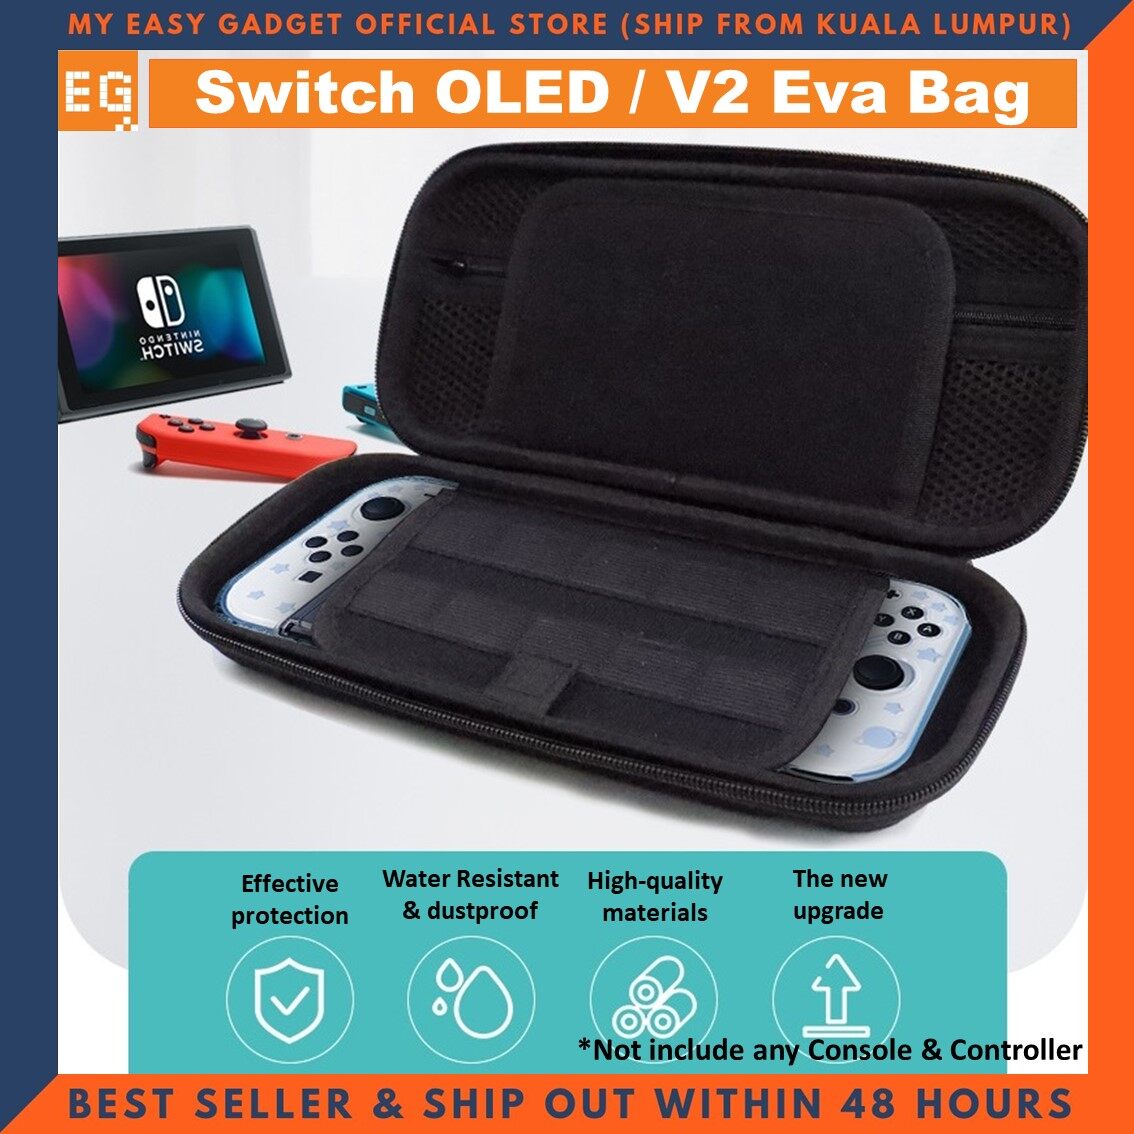 Hard Case Tough EVA Pouch Storage Bag Protective Handle Carry Travel Case for Nintendo Switch OLED Switch V2